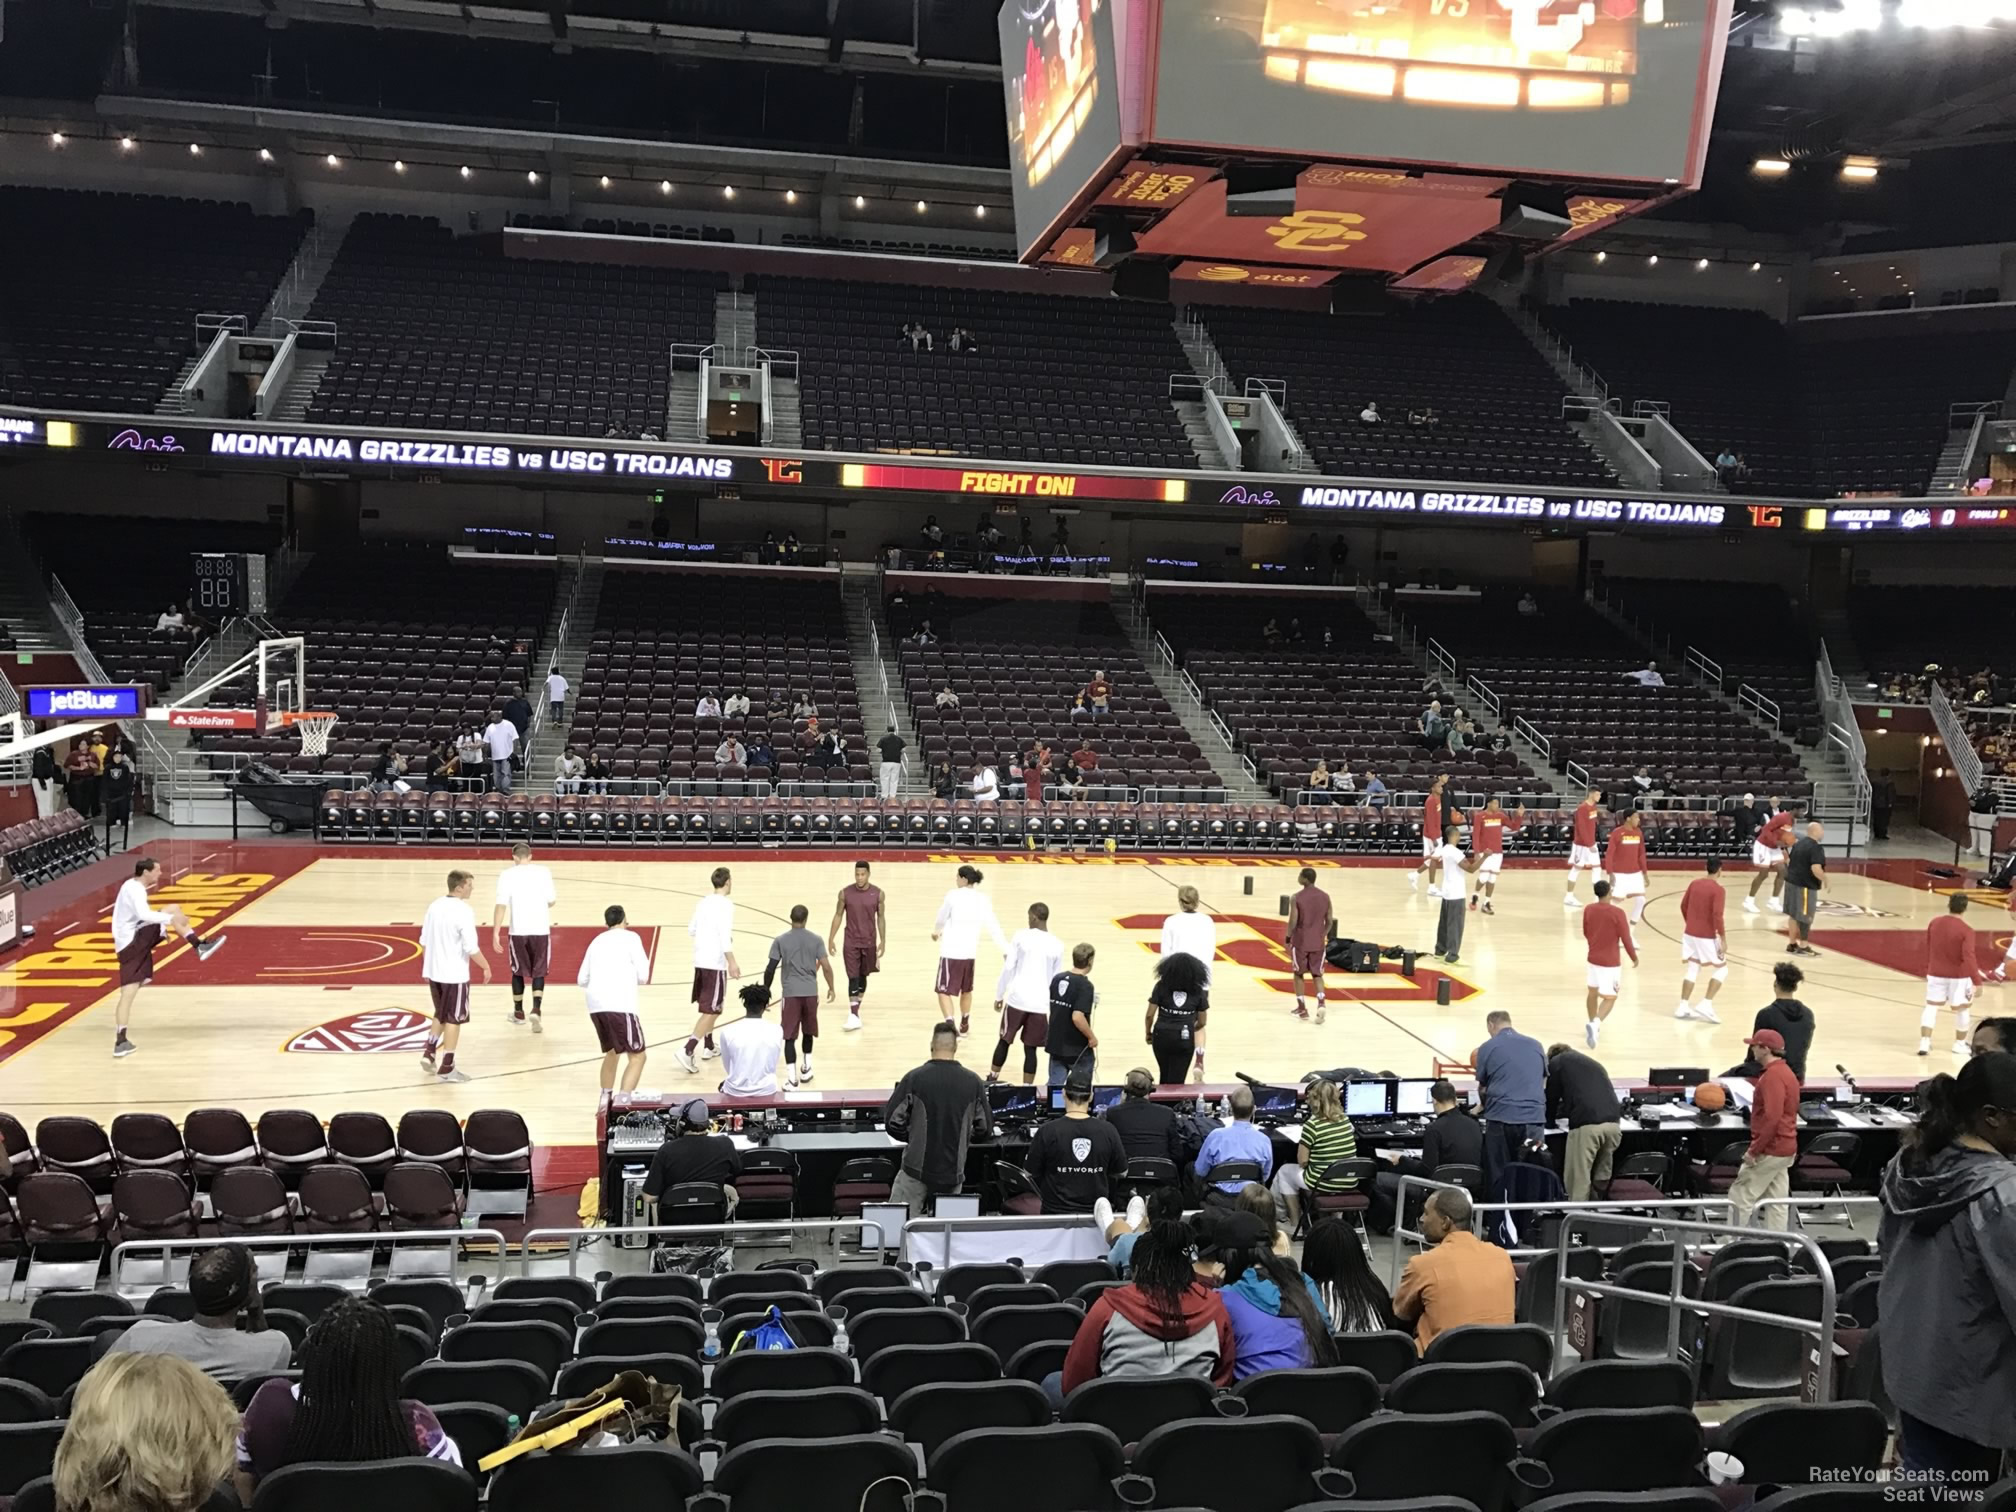 section 115, row 10 seat view  - galen center